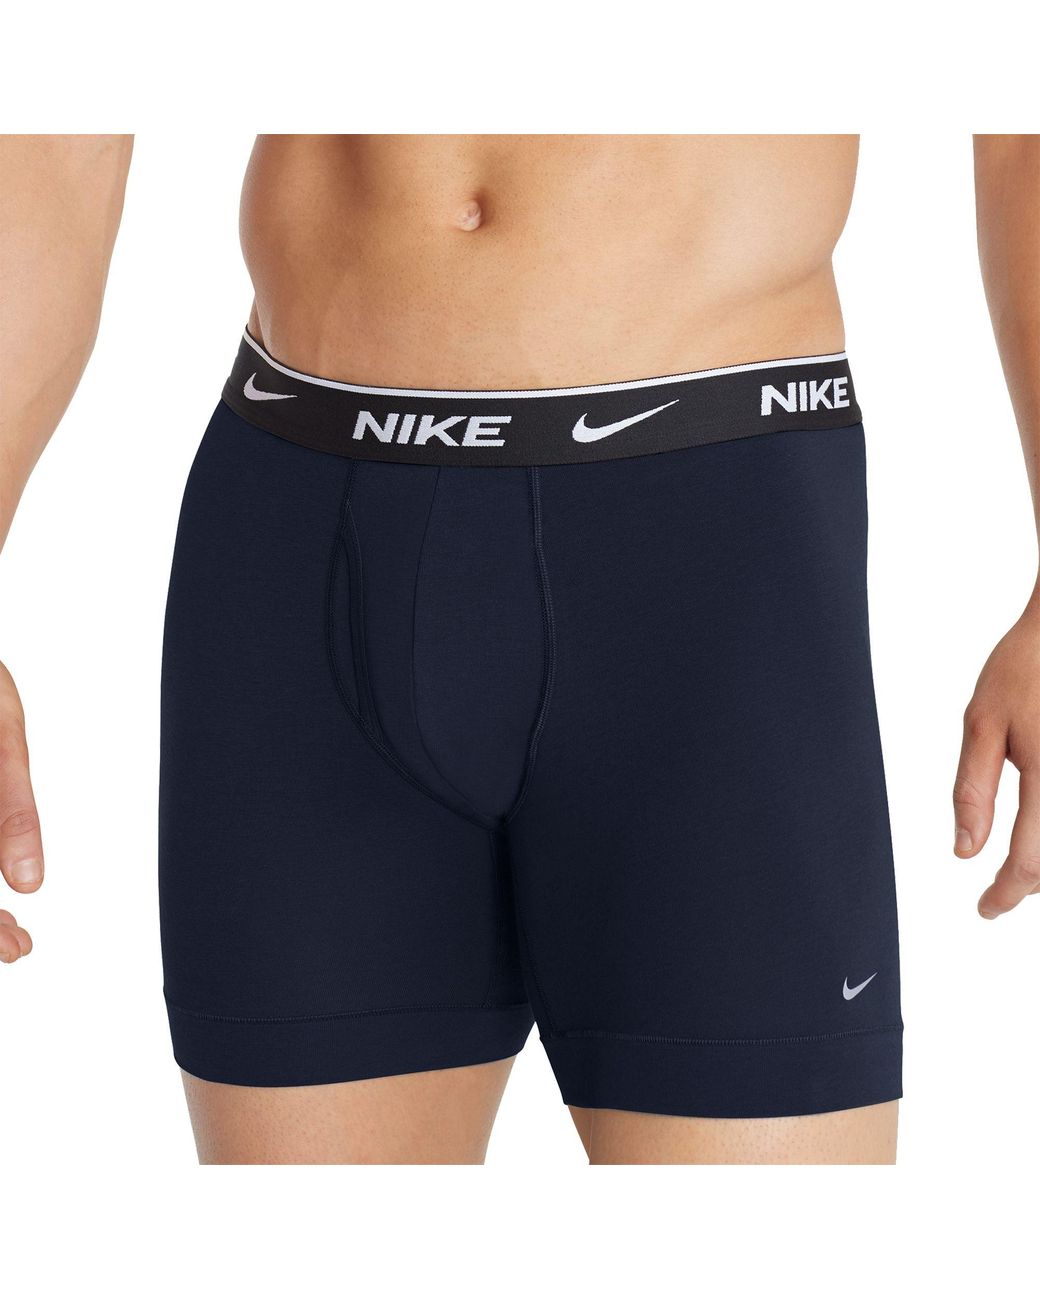 Nike Everyday Cotton Stretch Boxer Briefs – 3 Pack in Blue for Men - Lyst